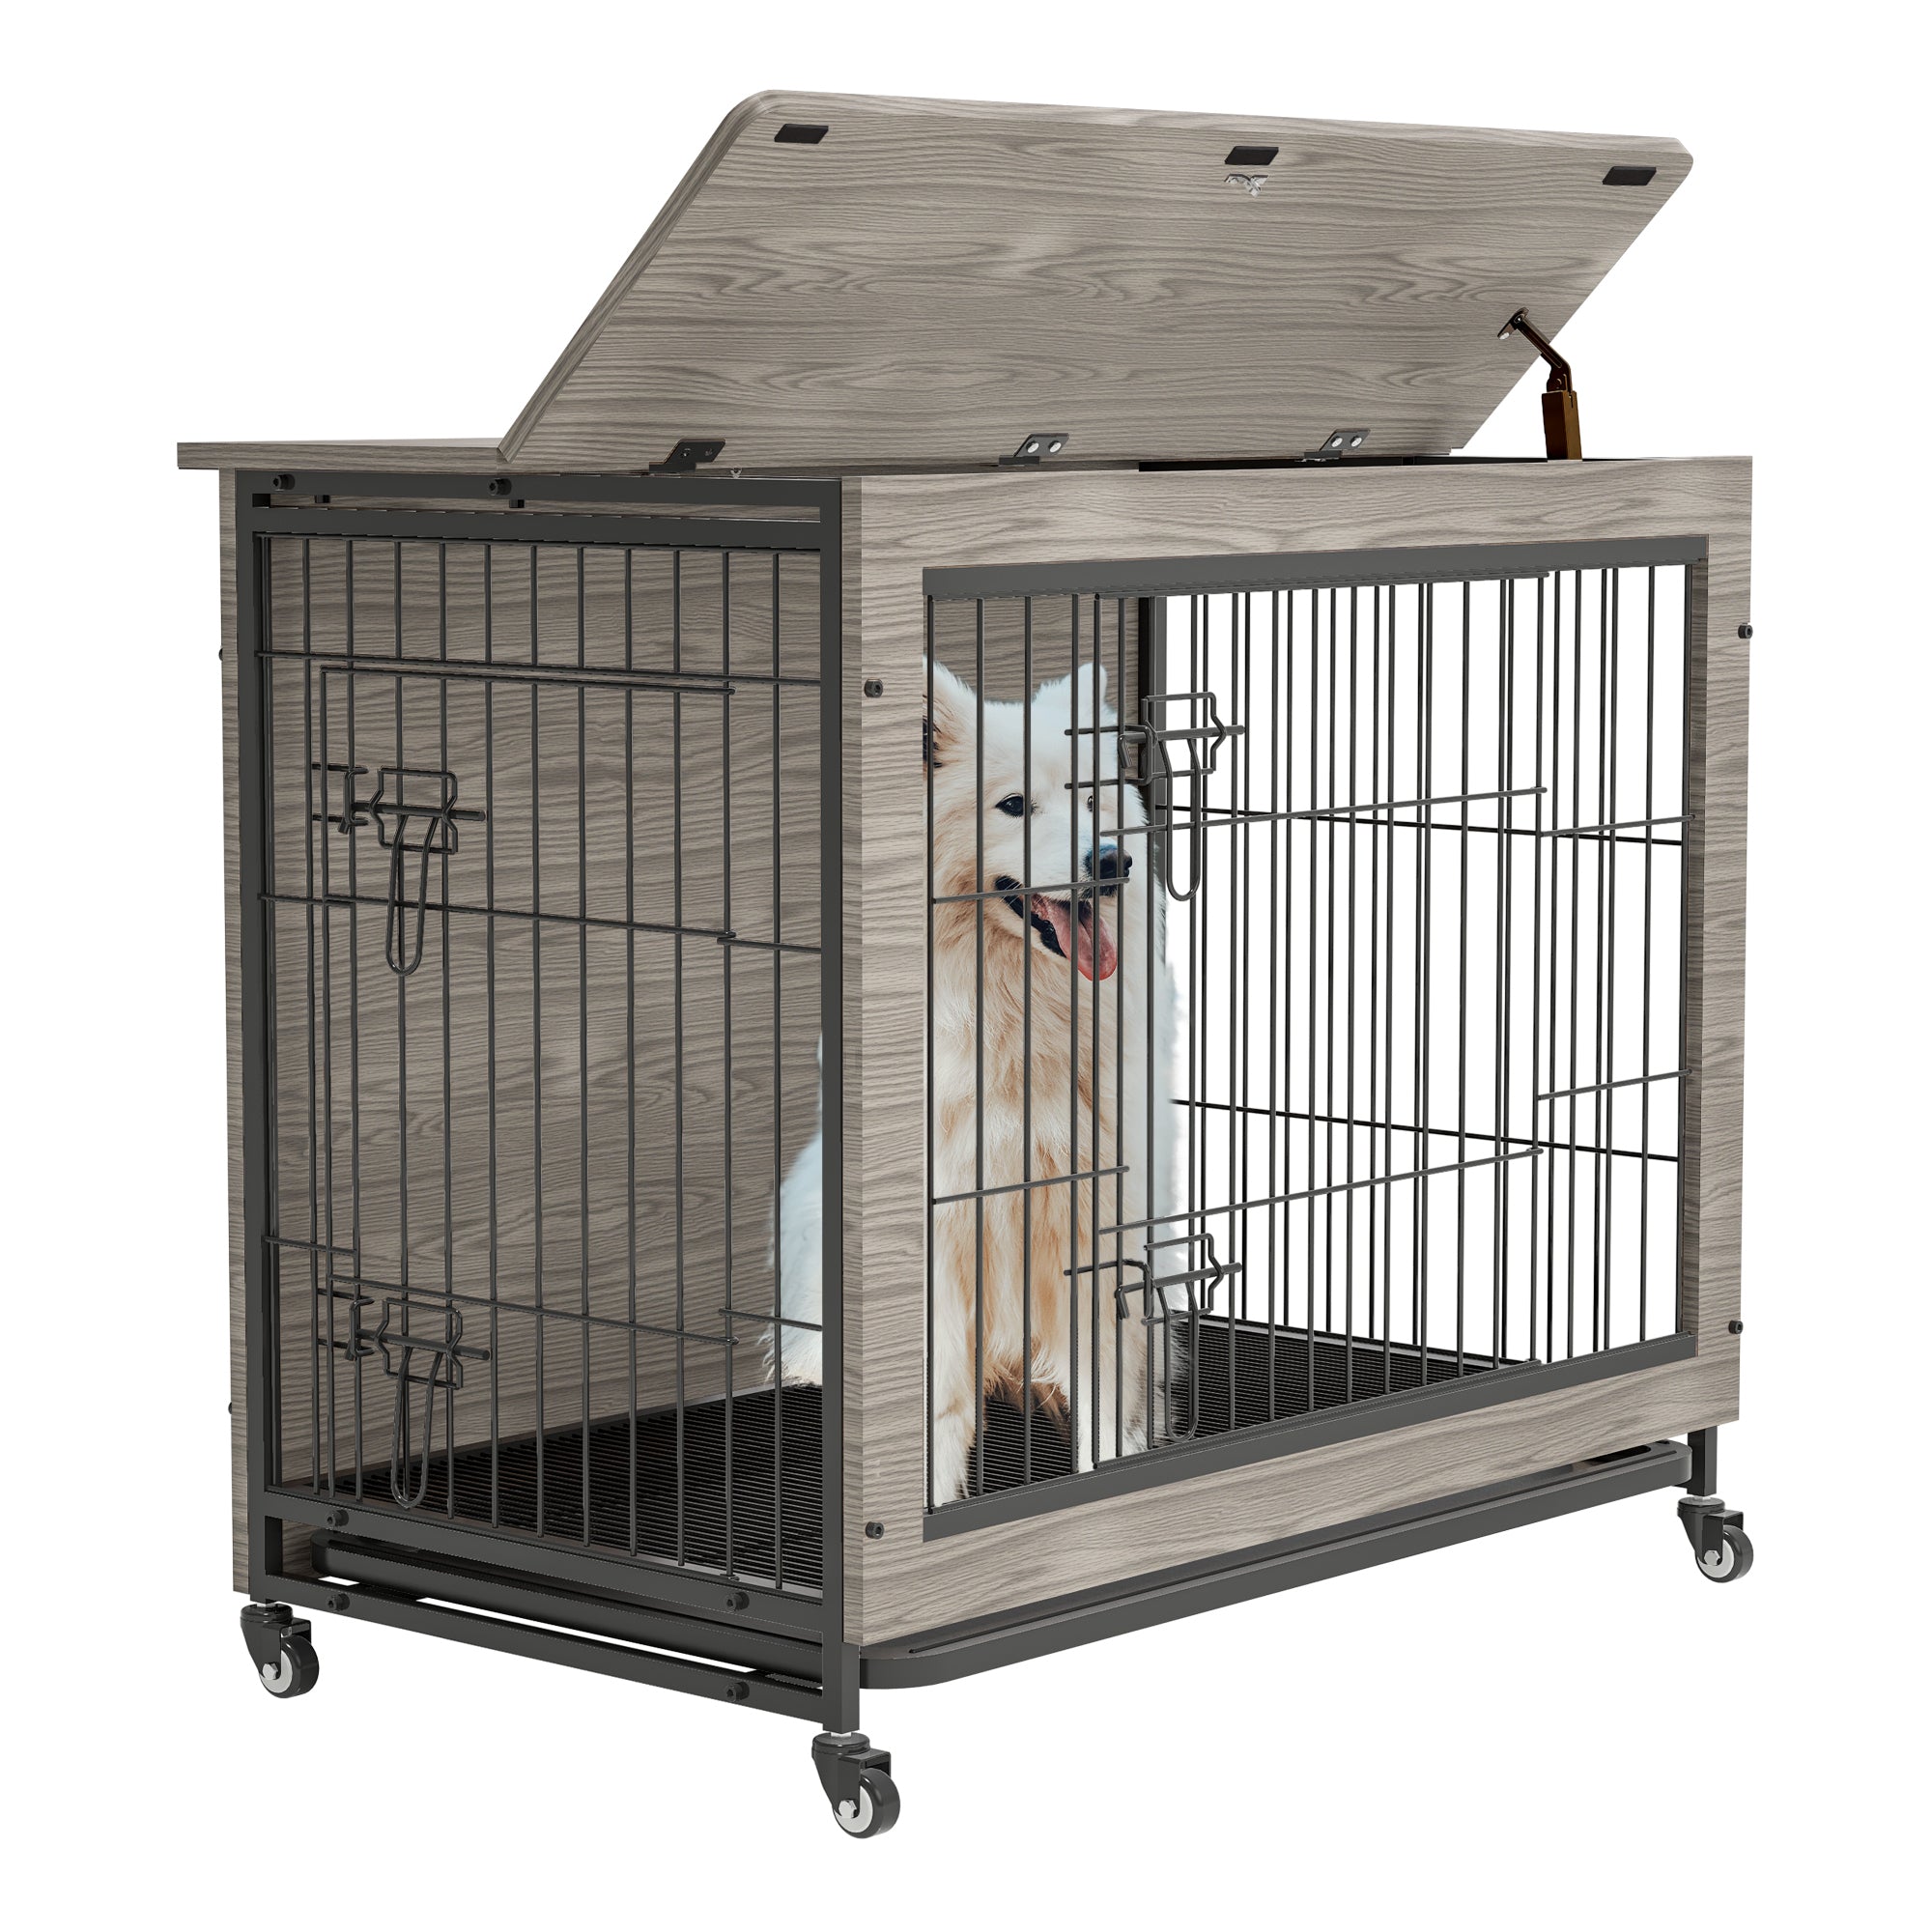 🆓🚛 Dog Crate Furniture, 38'' Heavy Duty Wooden Dog Kennel With Double Doors & Flip-Top for Large Dogs, Furniture Style Dog Crate End Table With Wheels, Gray 38.3"L X 23.4"W X 32"H